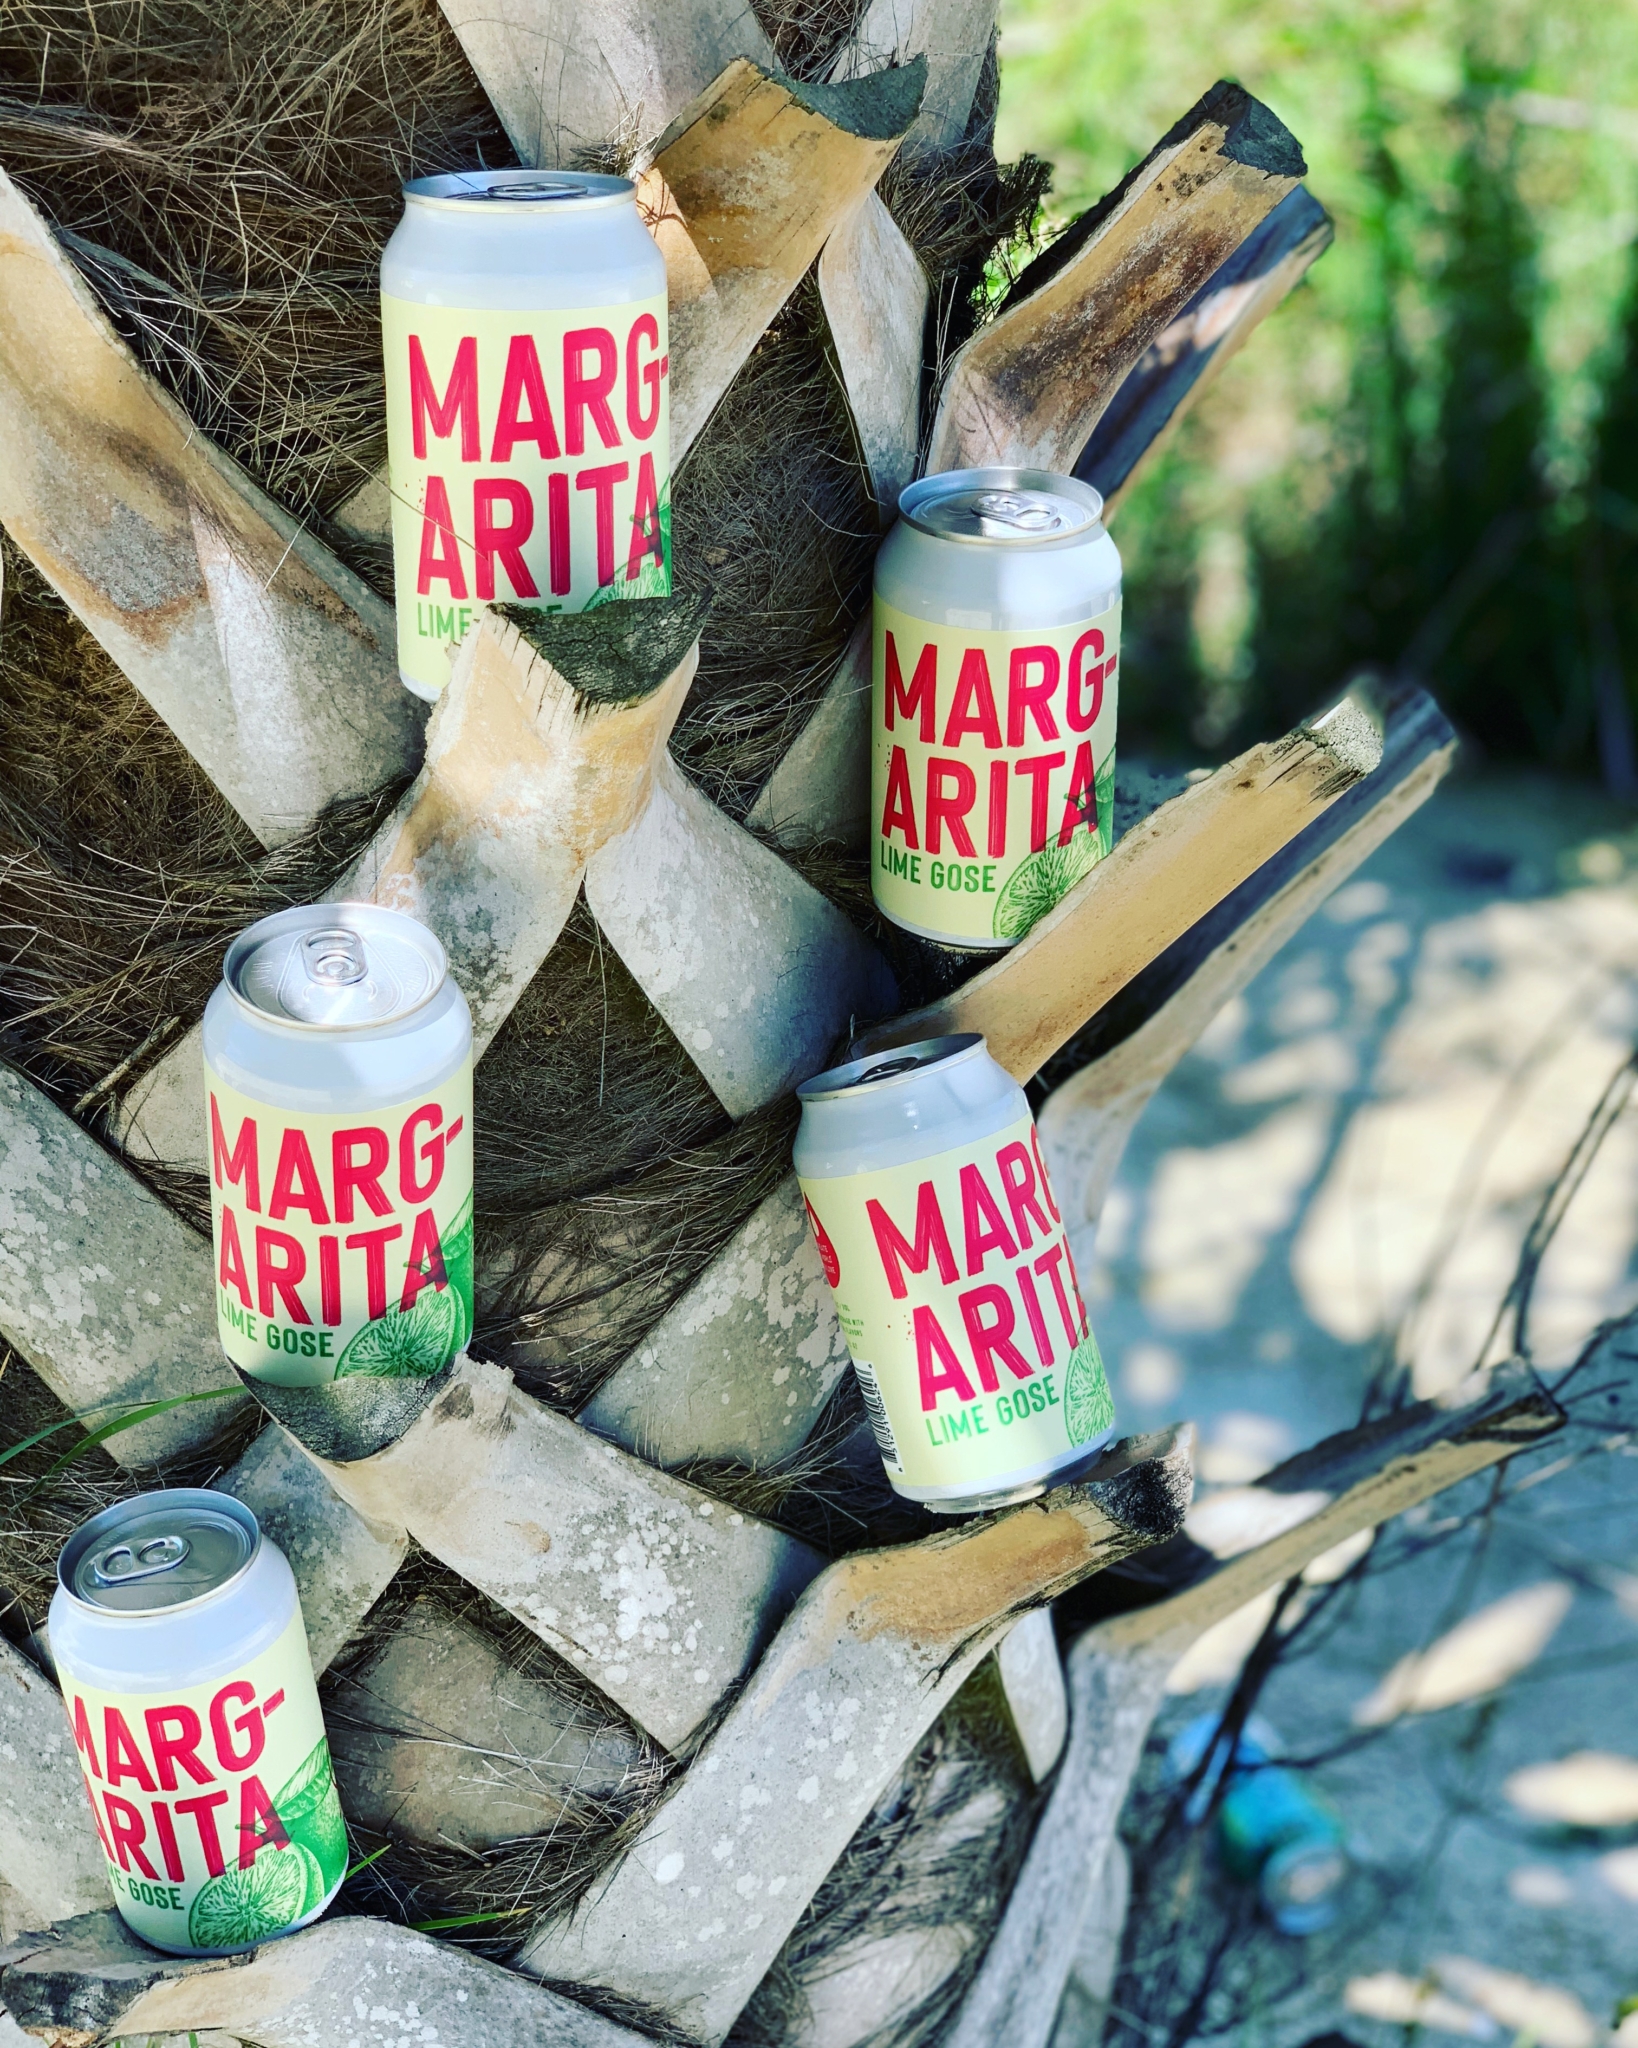 cans of TrimTab Brewing's Margarita Lime Gose balanced on a palm tree trunk